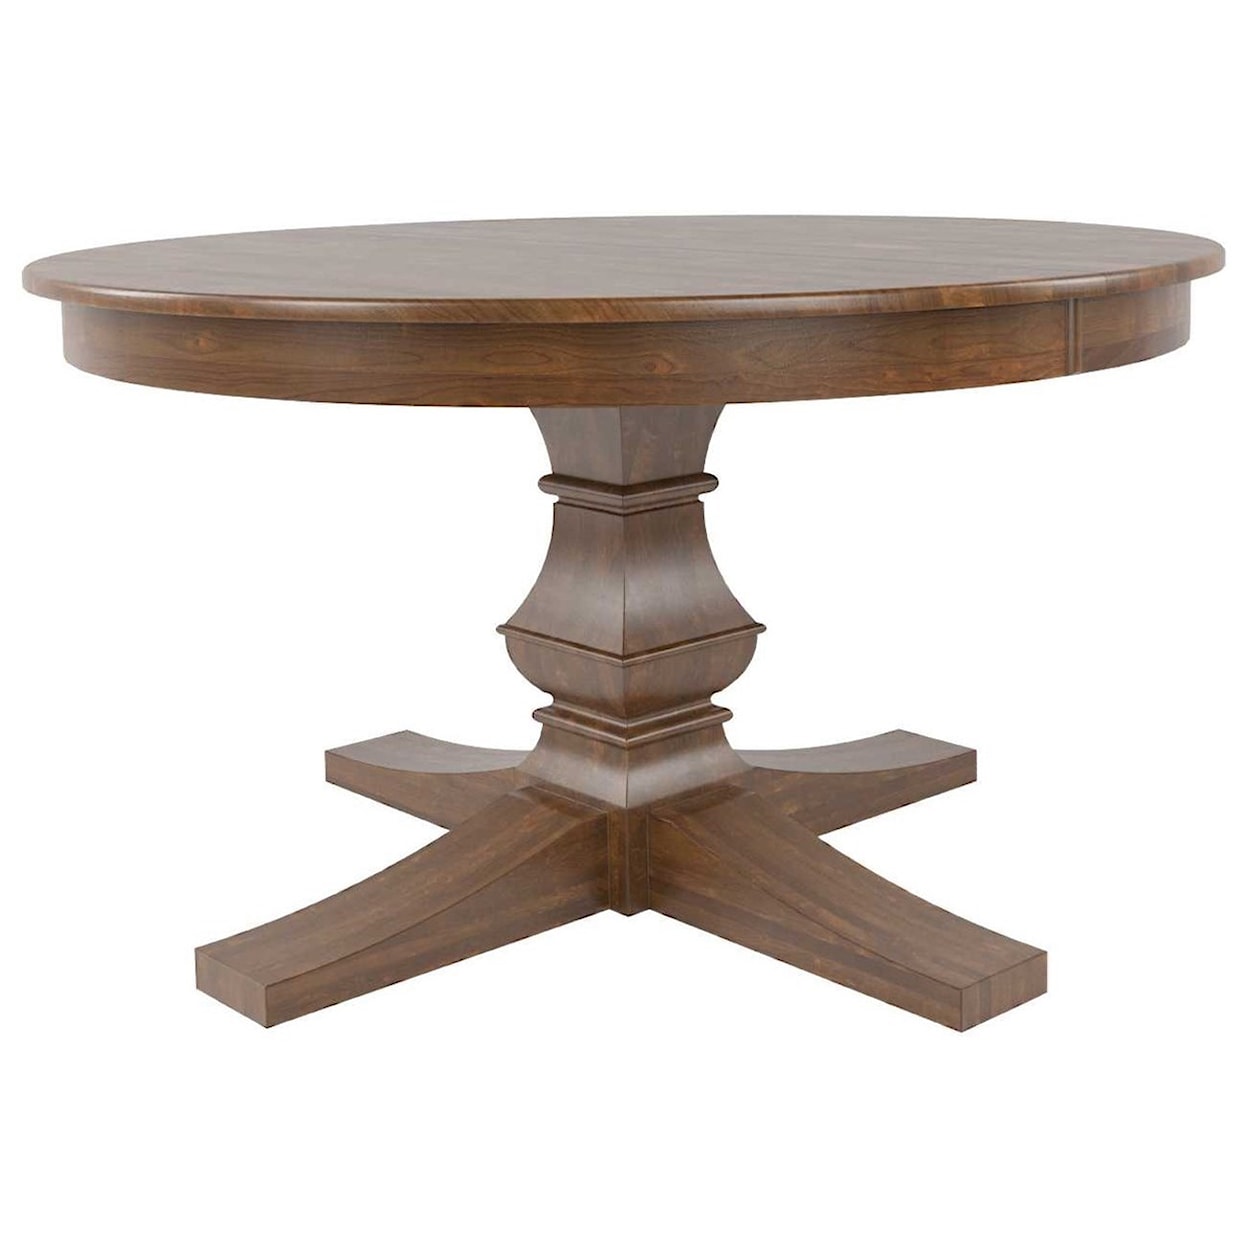 Canadel Canadel Customizable Round Dining Table